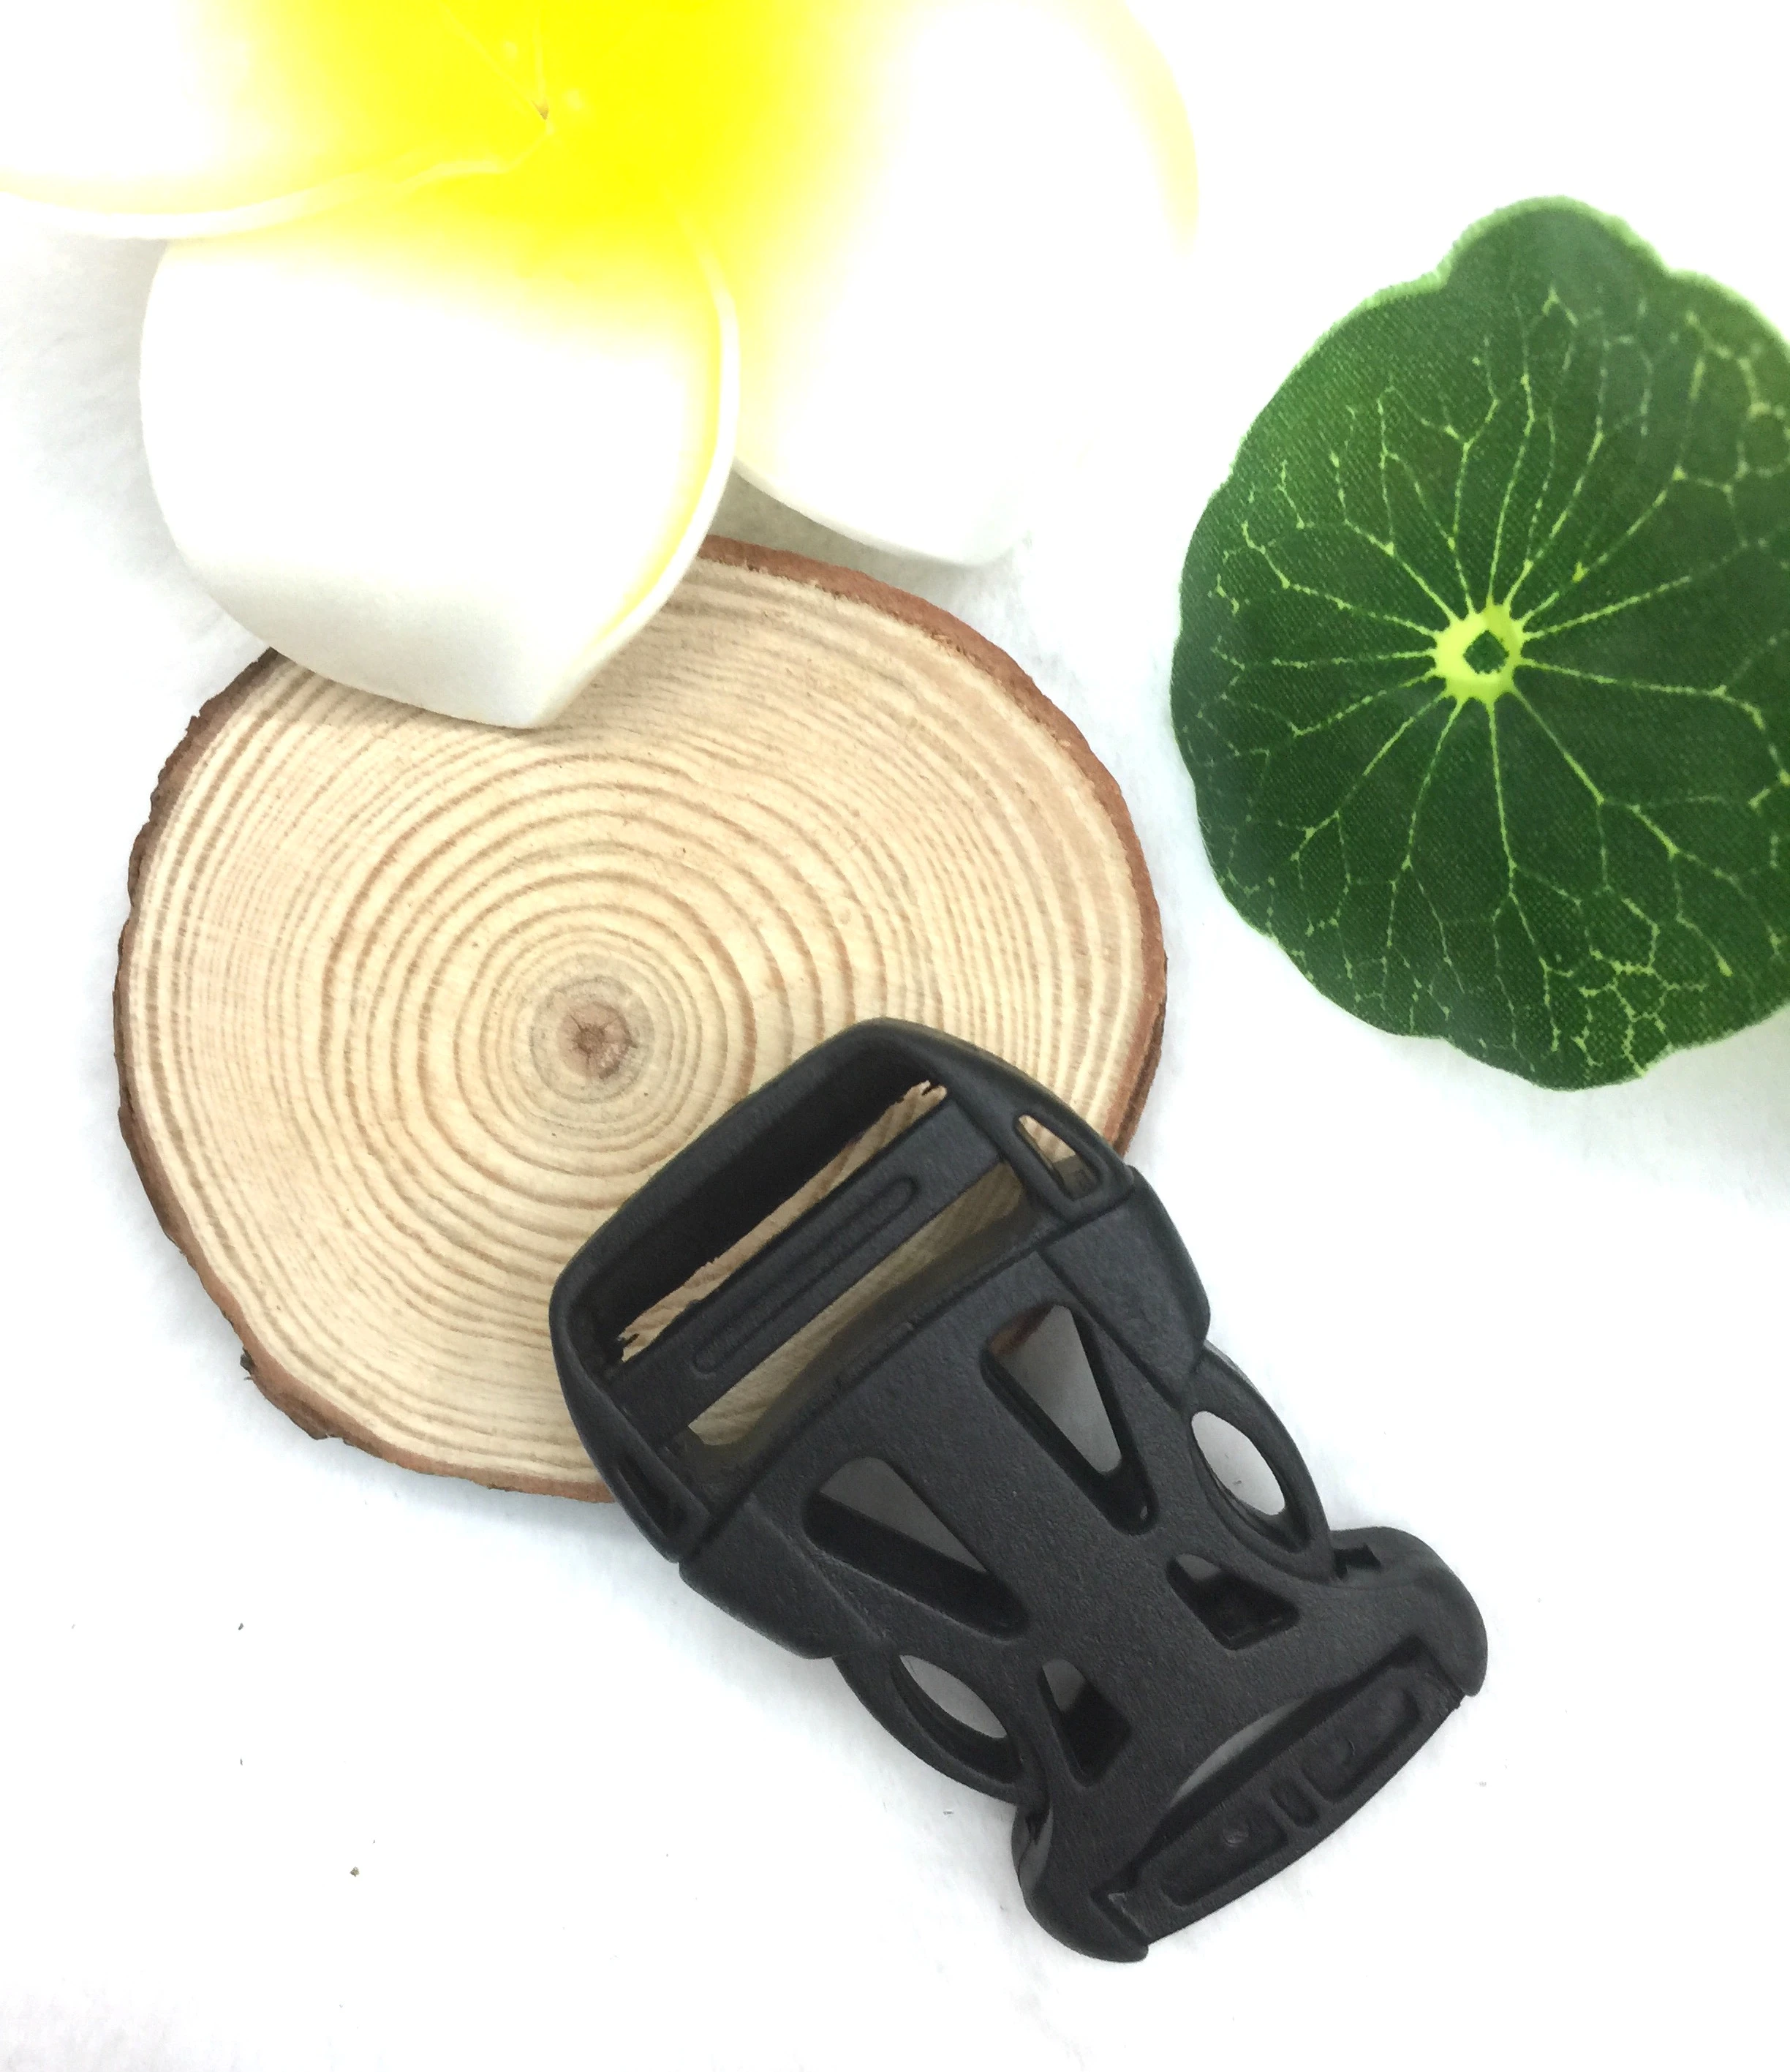 YK2064 Wholesale Plastic Quick Side Release Buckle For Bag Accessories,High-quality plastic buckle, luggage accessories